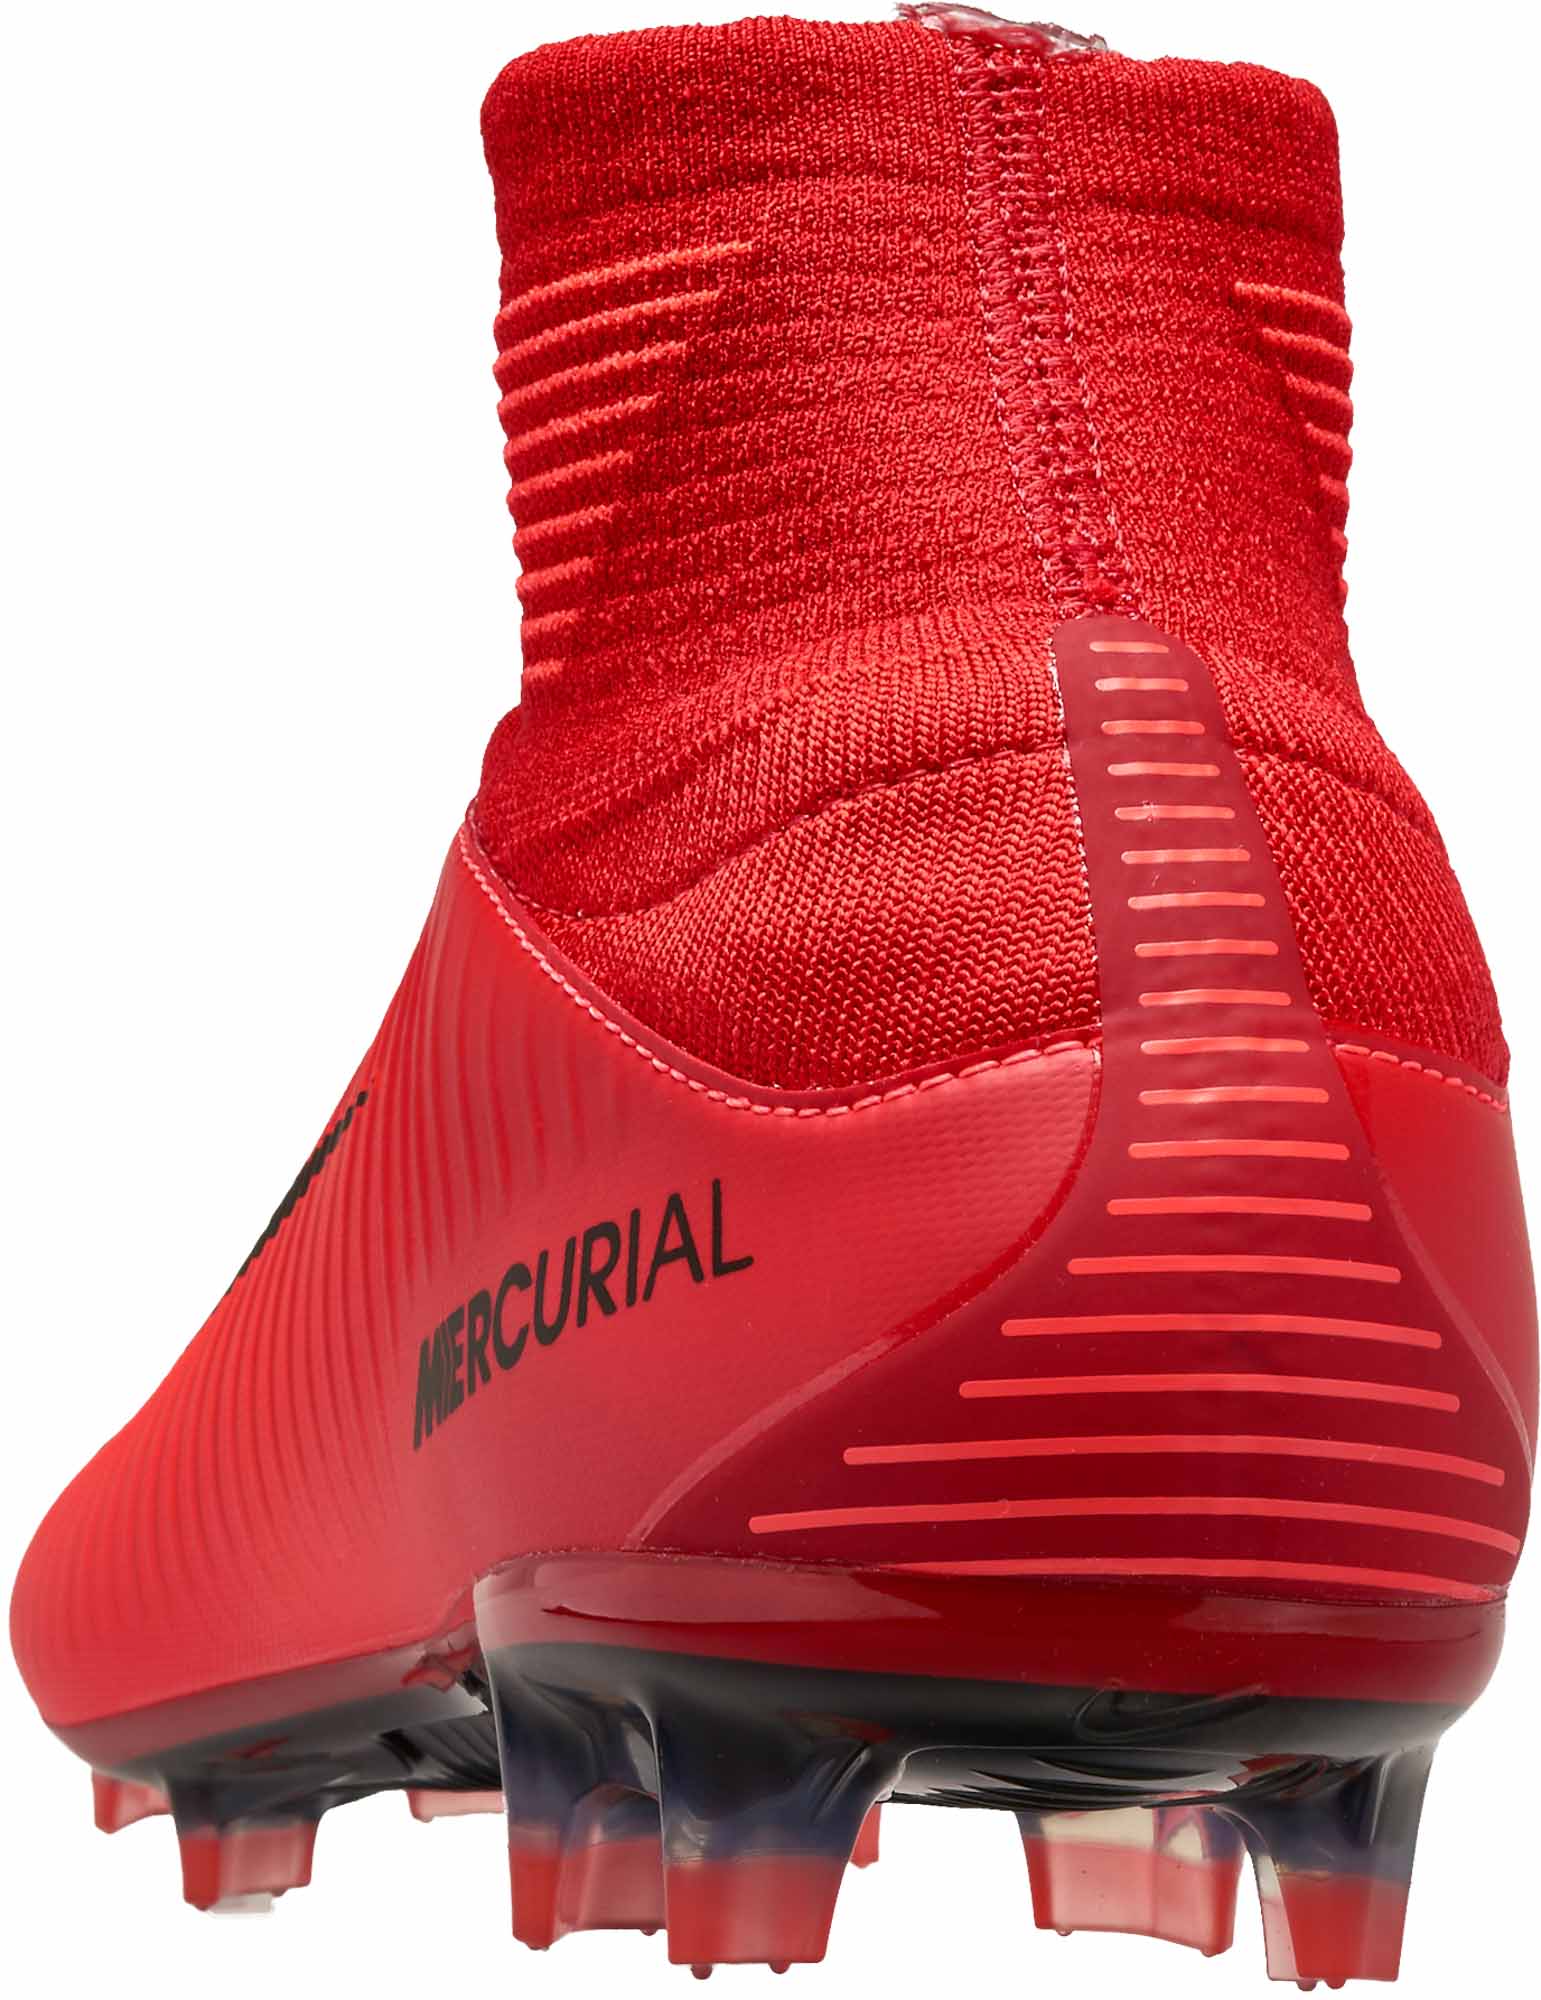 mercurial veloce iii df fg review